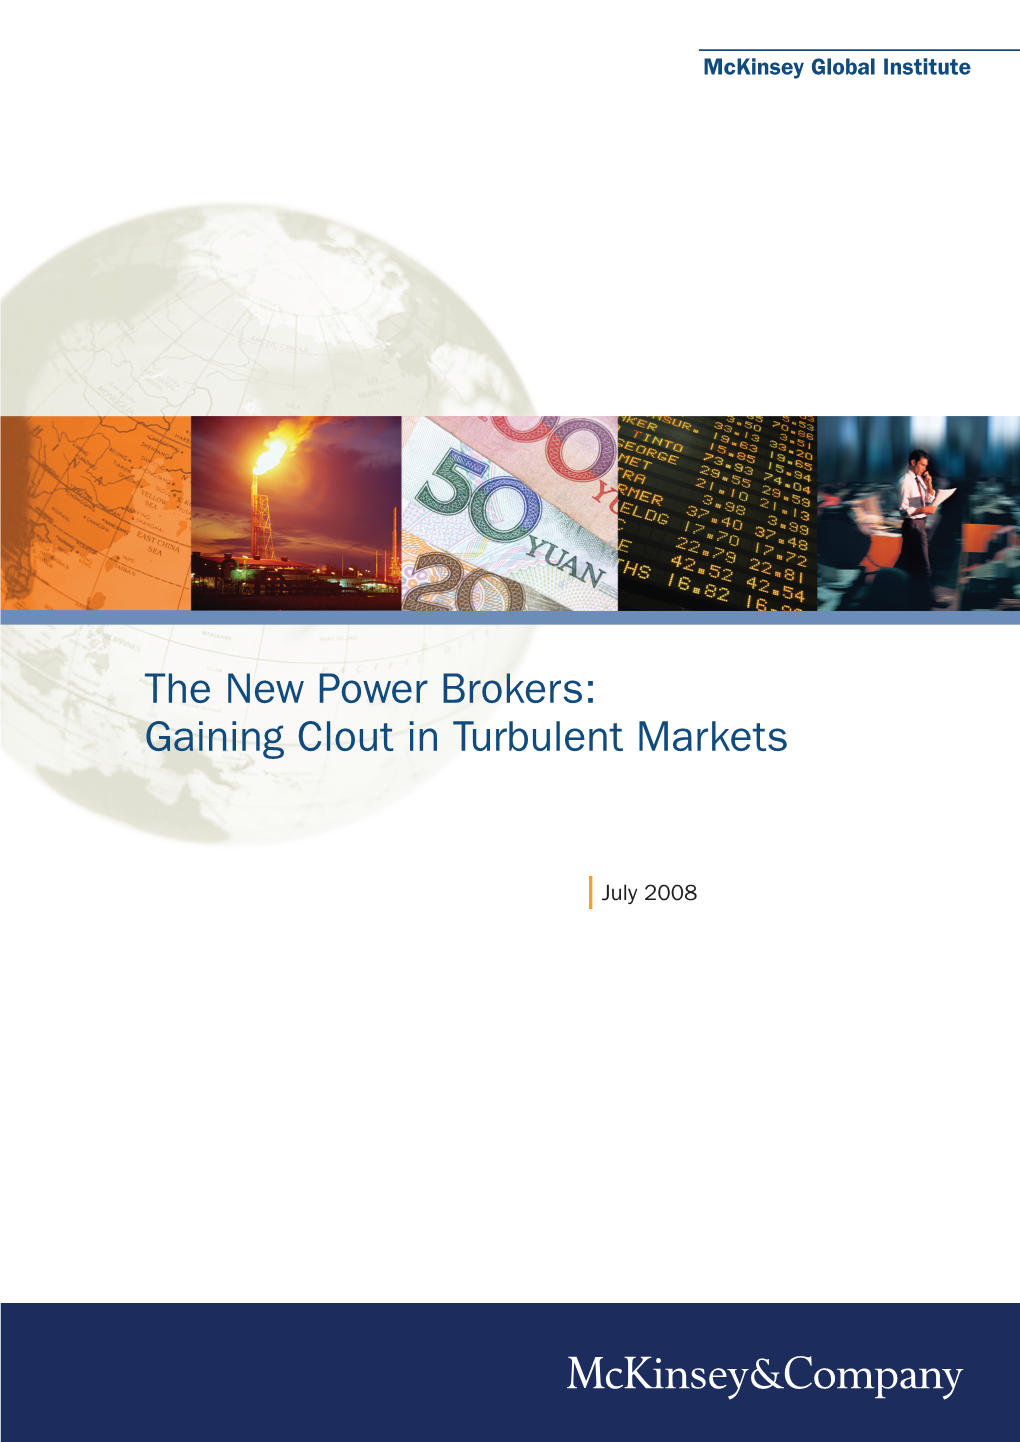 The New Power Brokers: Gaining Clout in Turbulent Markets